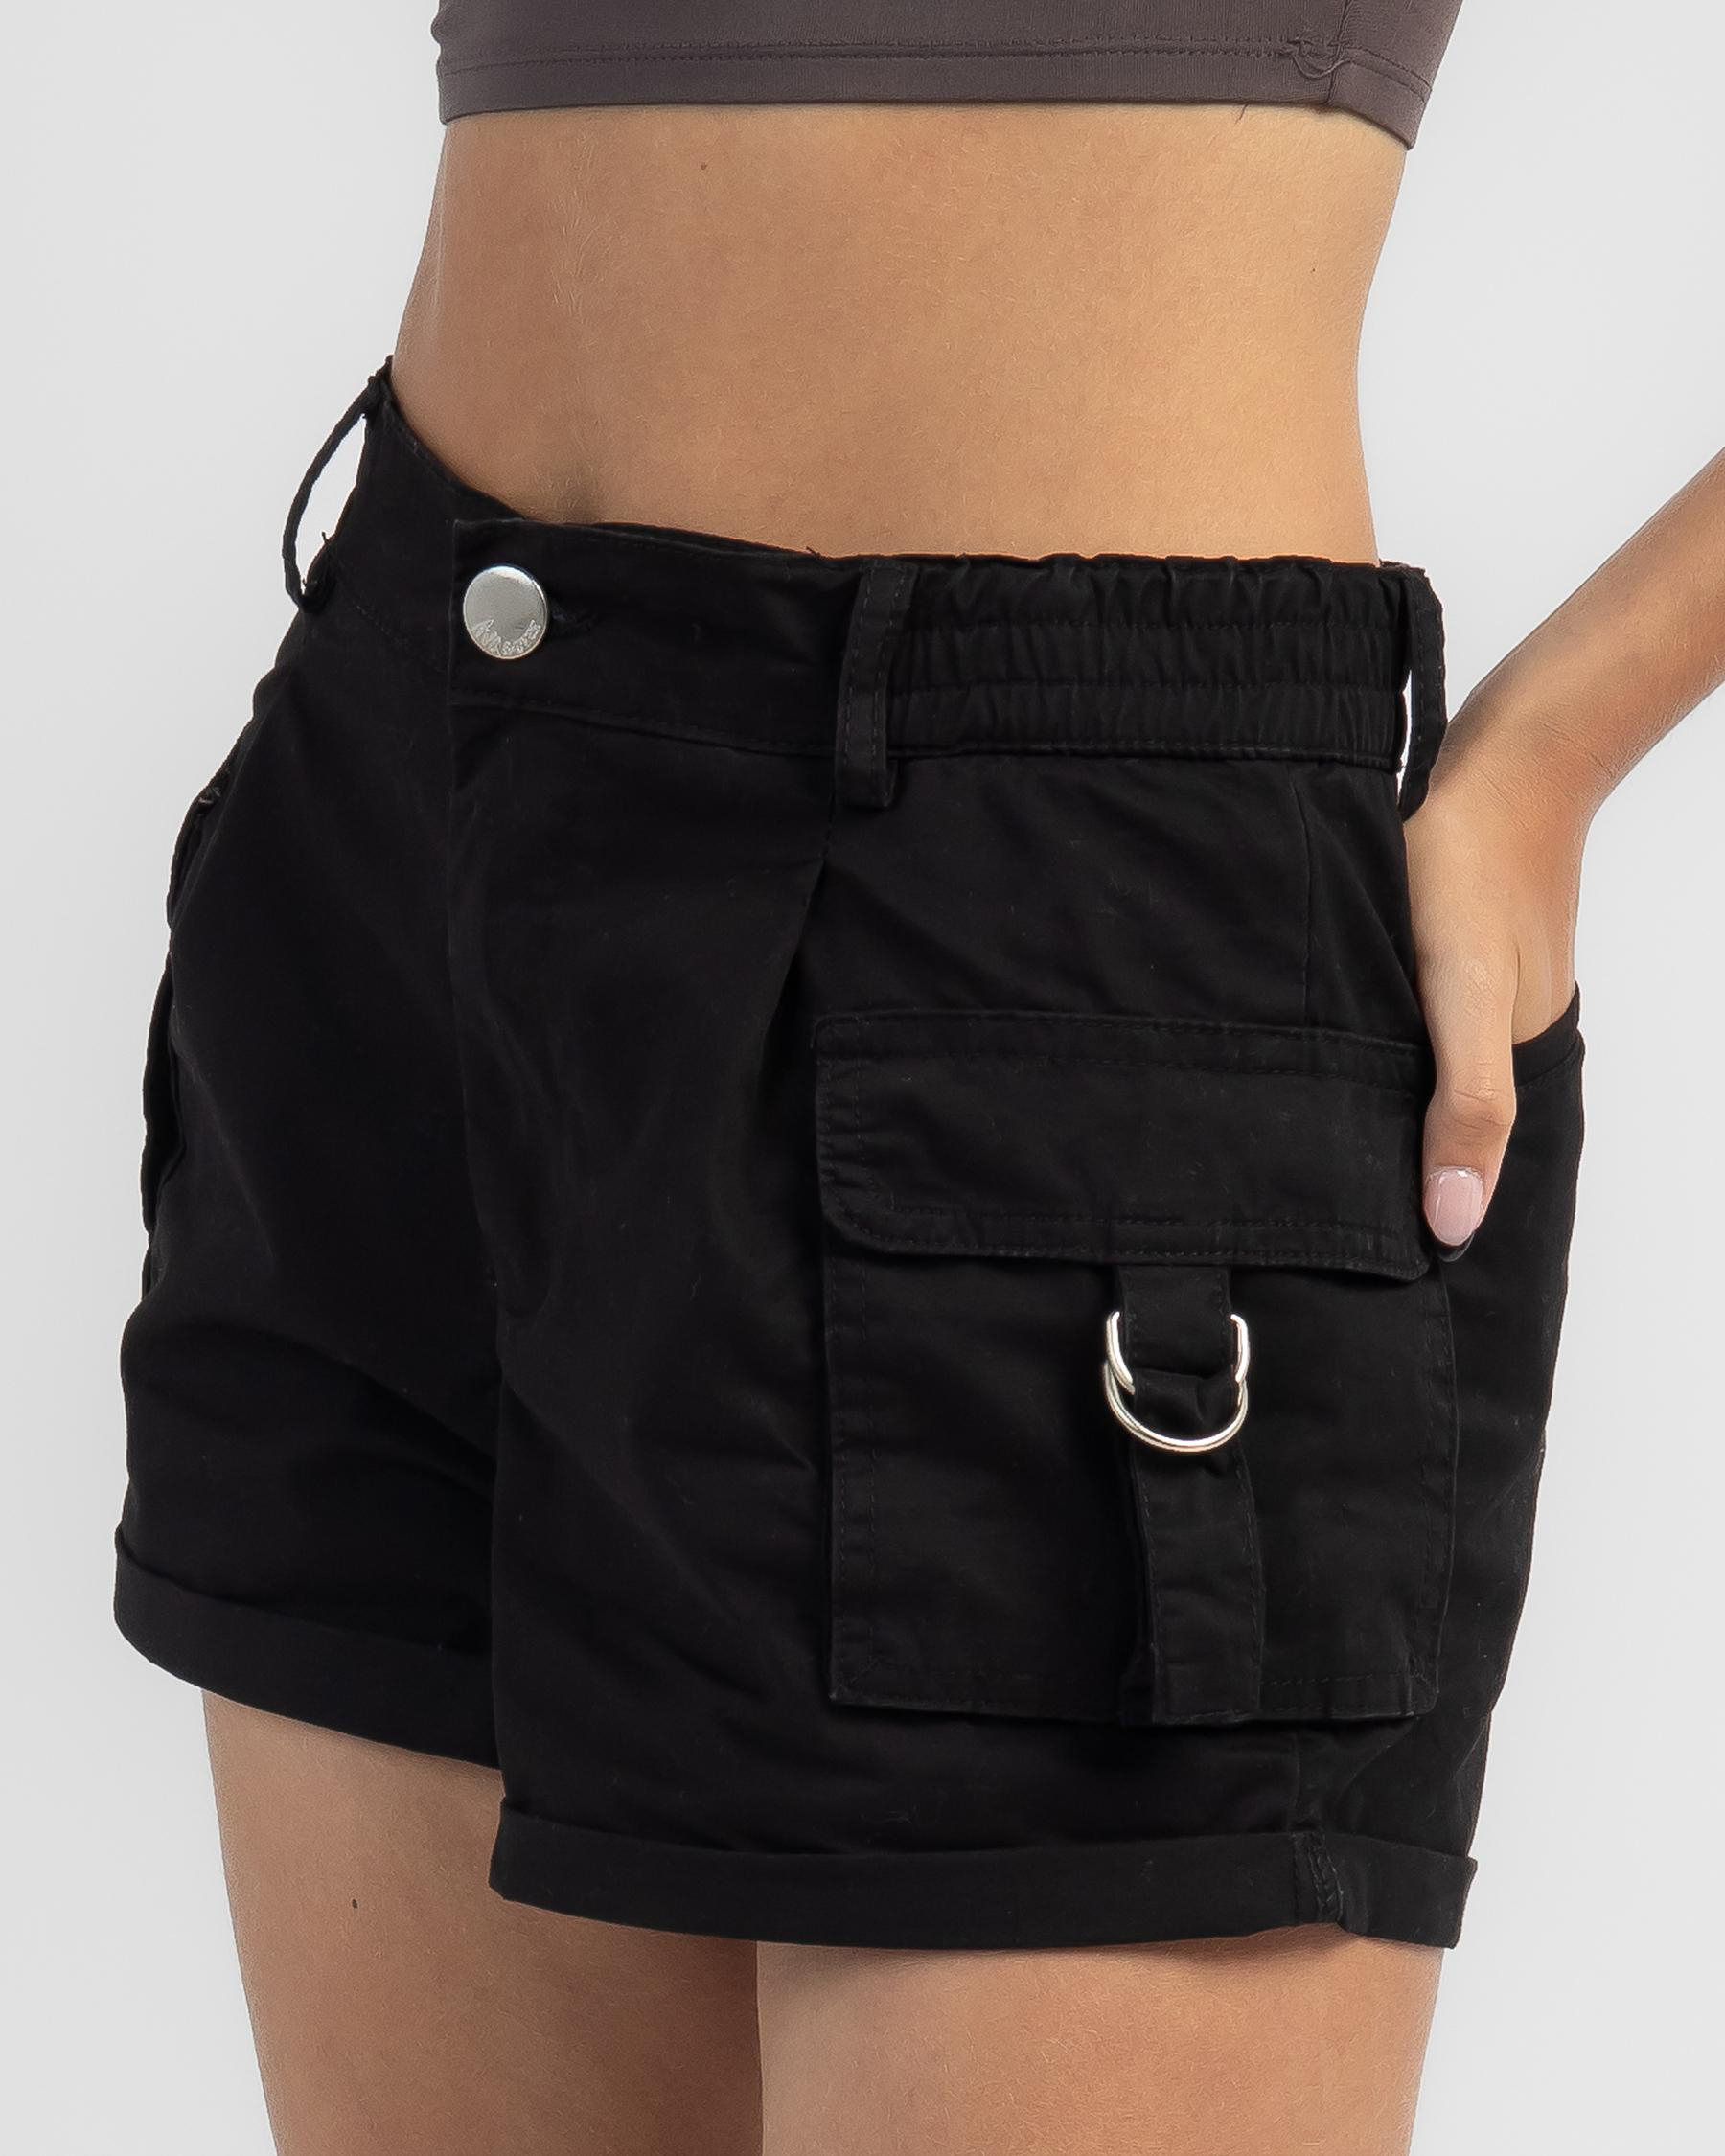 Ava And Ever Moria Shorts In Black - Fast Shipping & Easy Returns ...